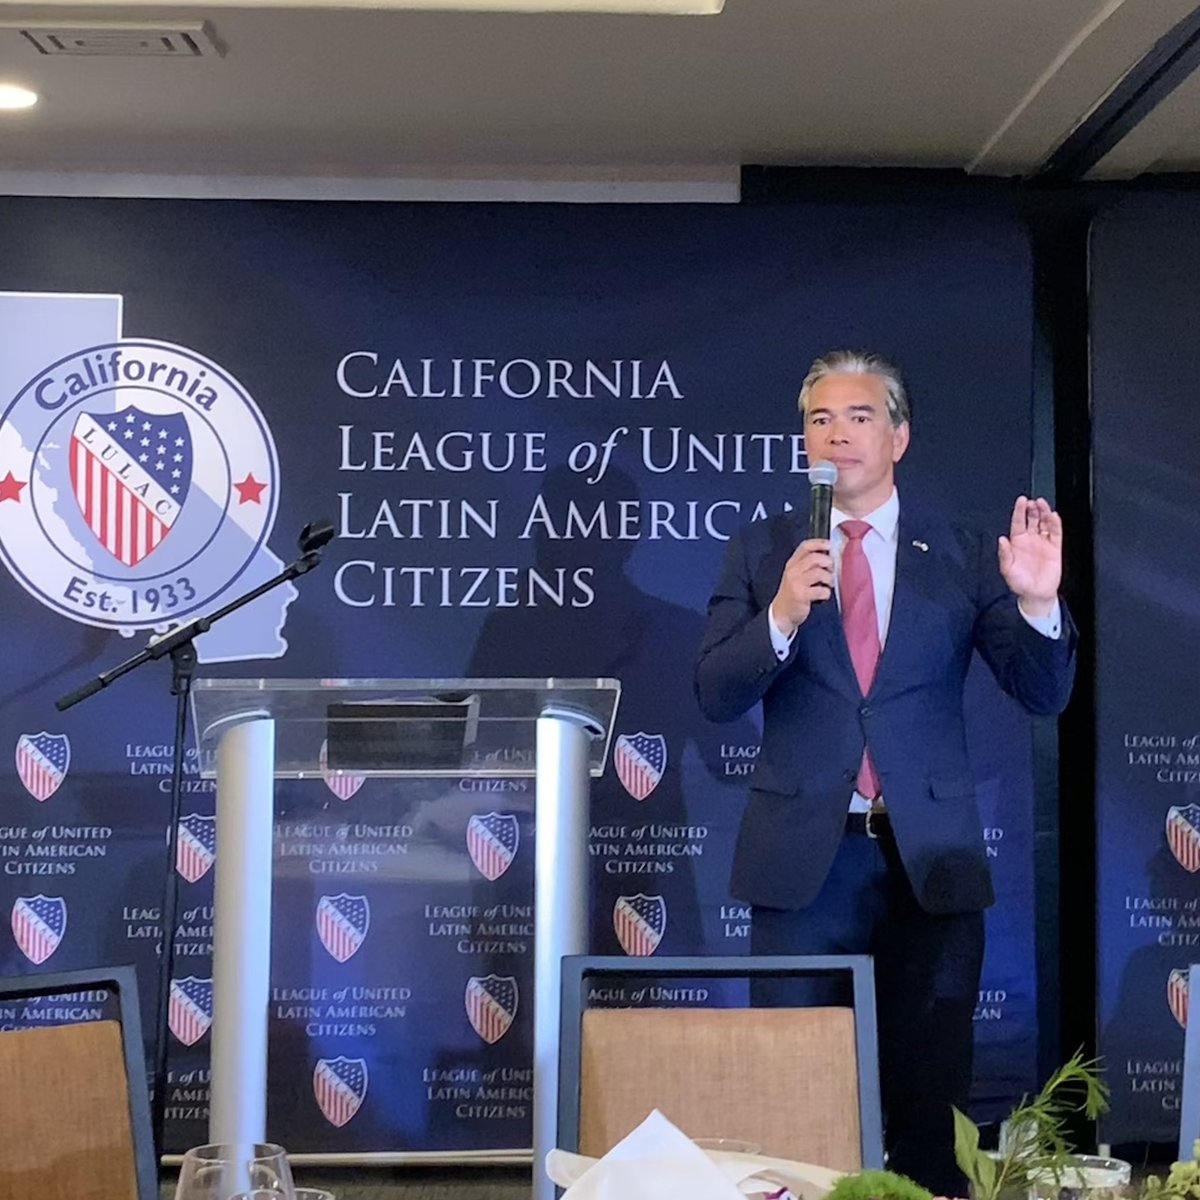 Thrilled to speak at @LULAC and @CALULACofficial's 75th Annual Convention and recognize the incredible work being done.   LULAC is critical in pioneering change and fighting against systemic injustices. We can’t undo the past, but we can build a better and more equitable future.